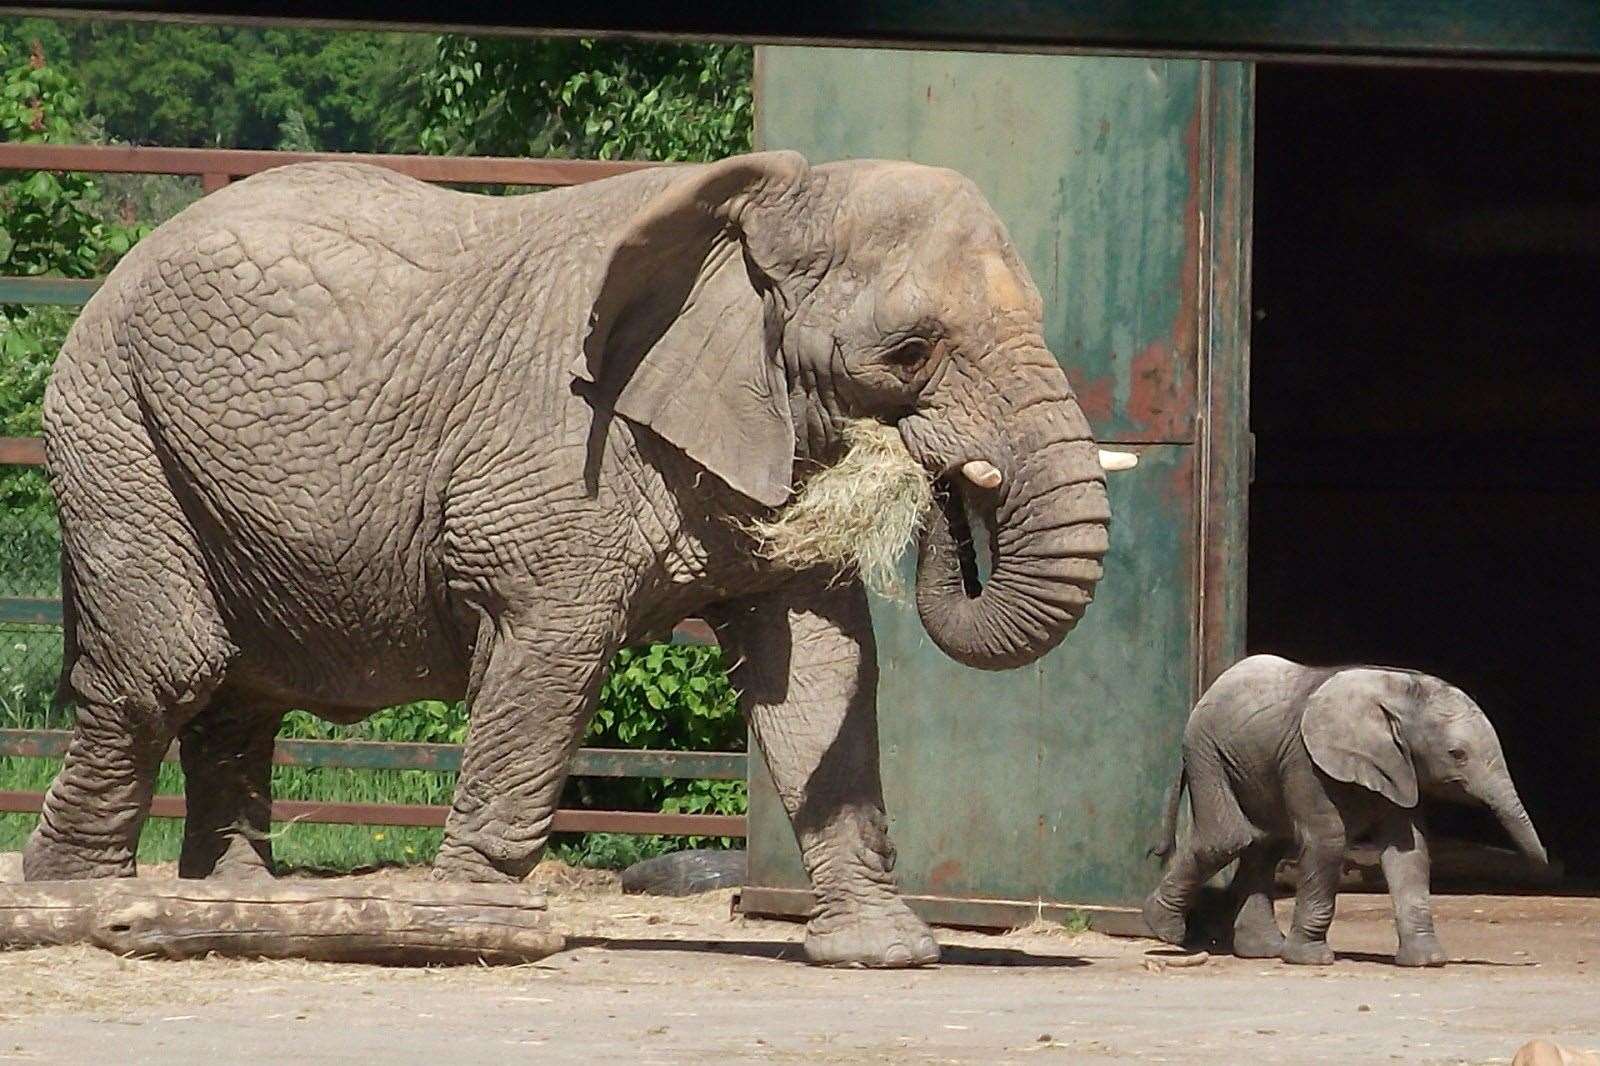 Howletts, which has the UK's largest elephant herd, and Port Lympne will remain open